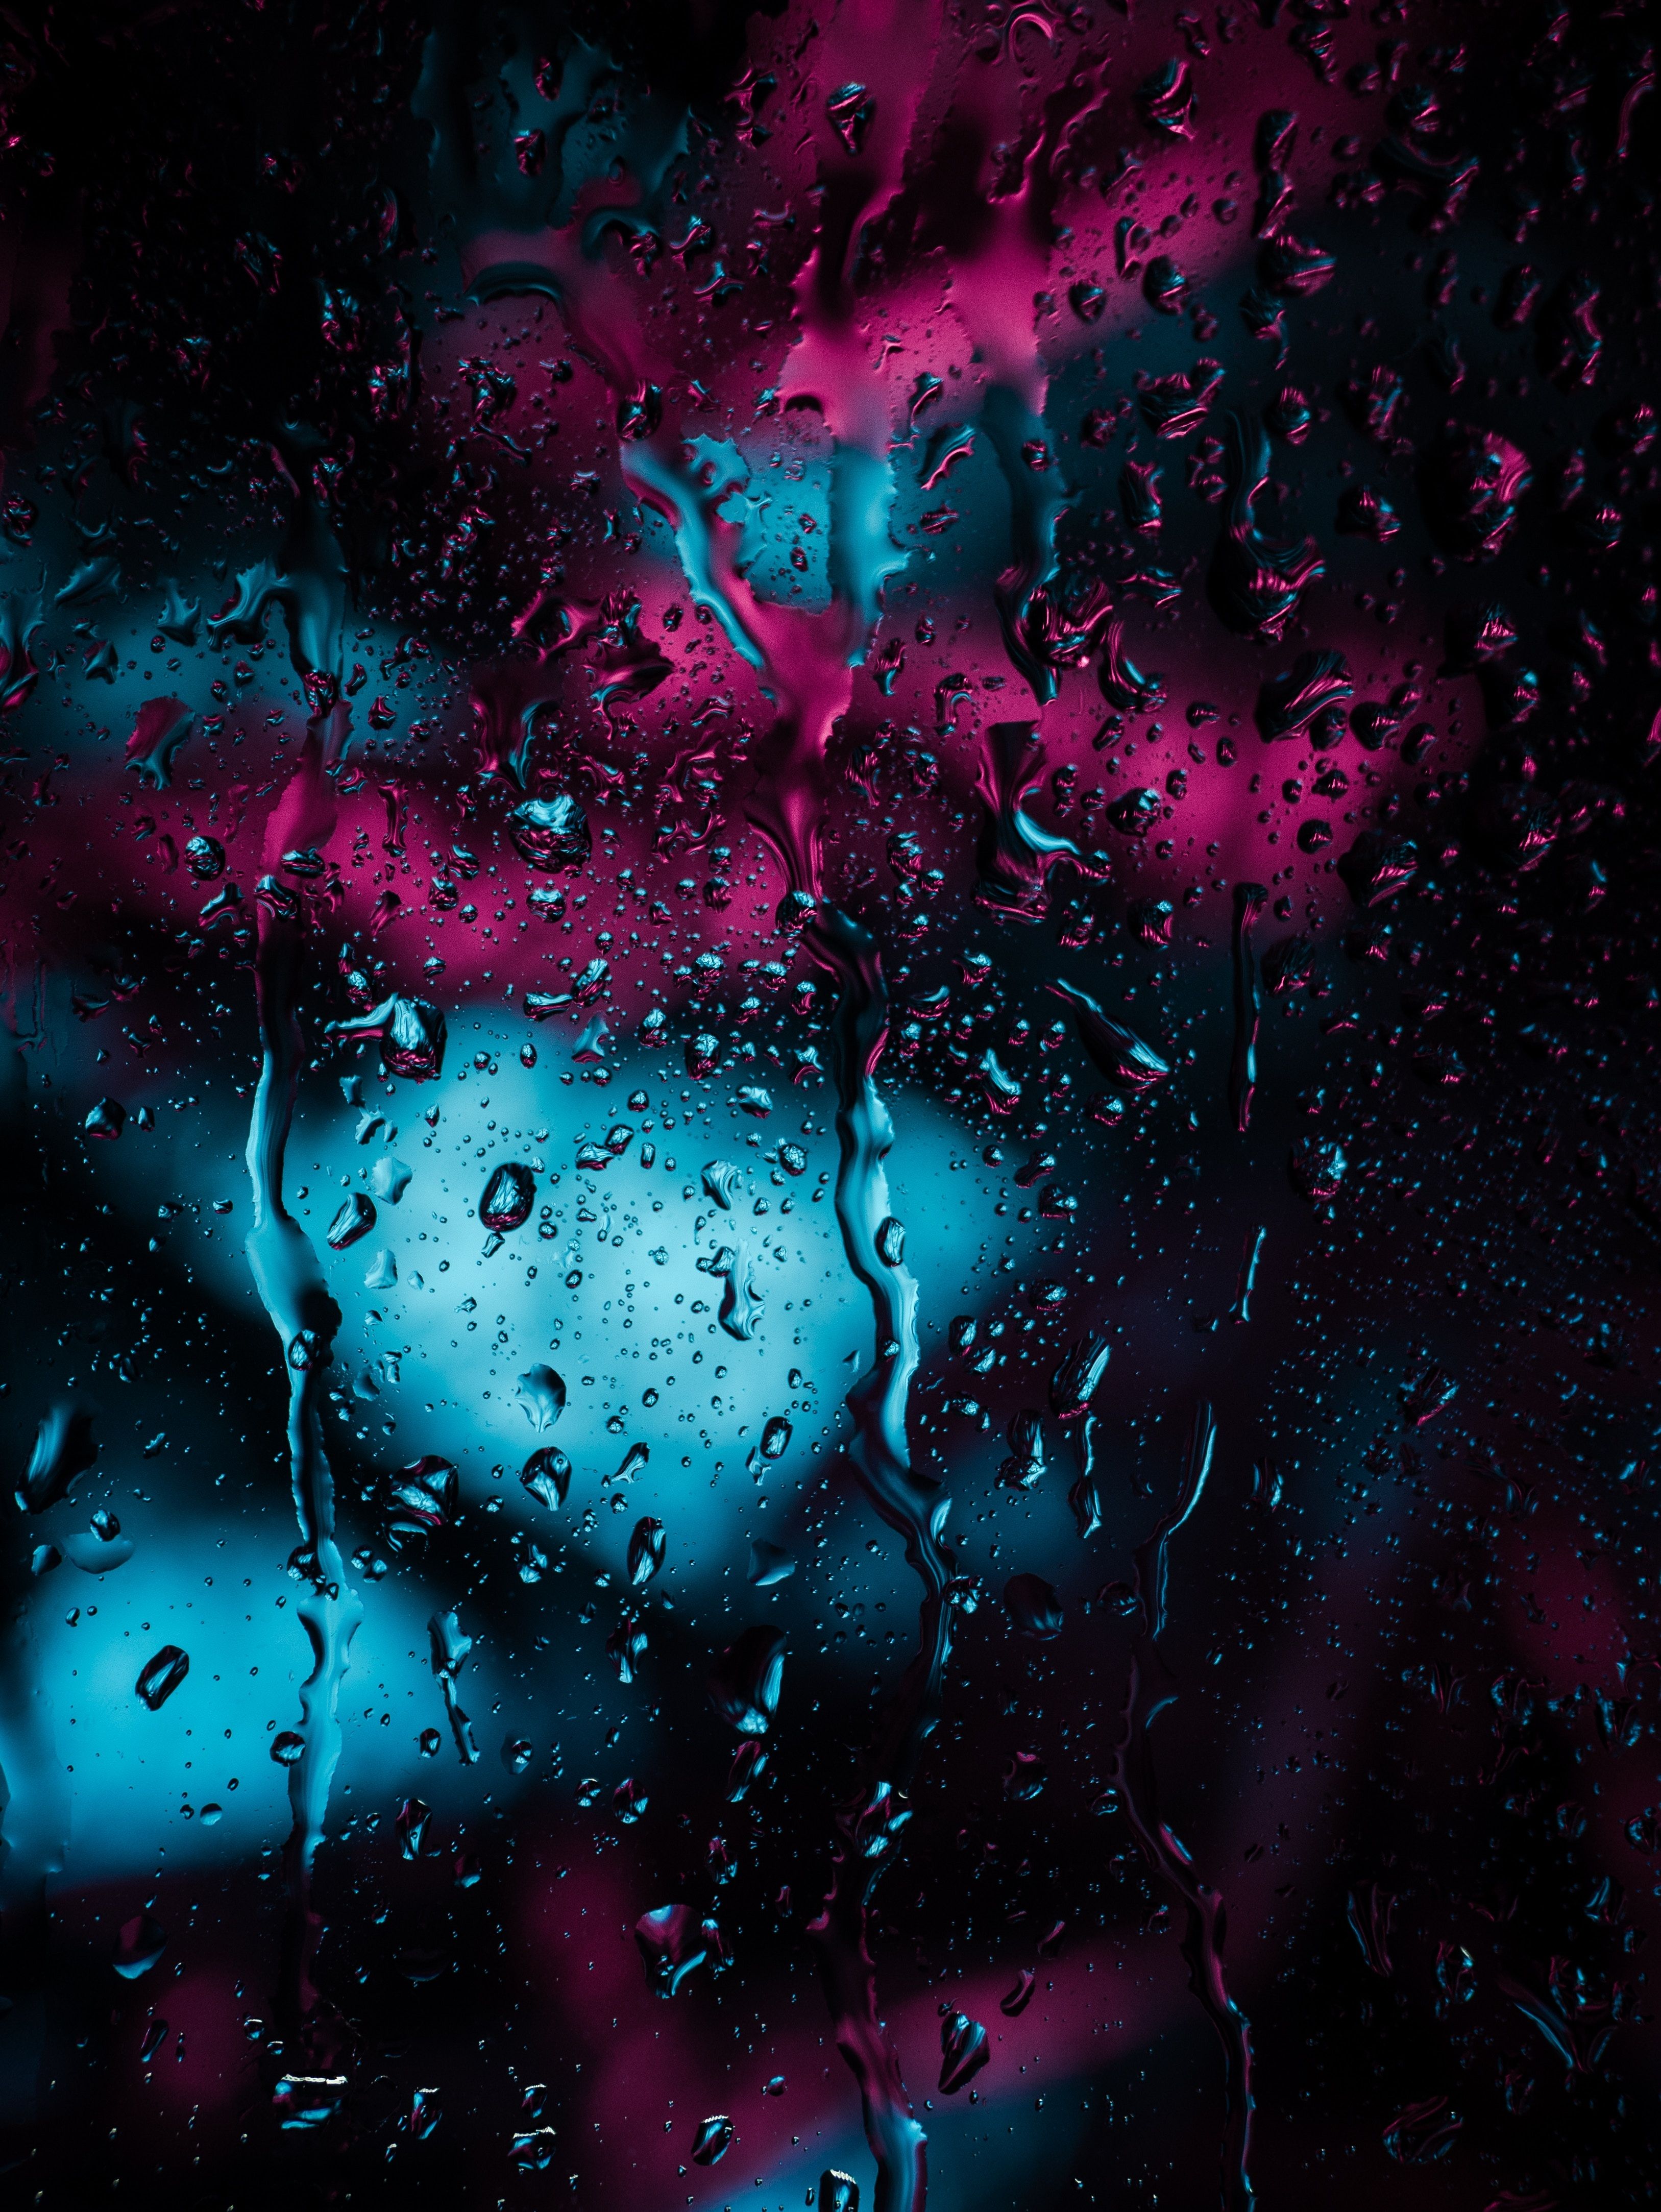 A water droplets on a glass with a dark background - Blurry, rain